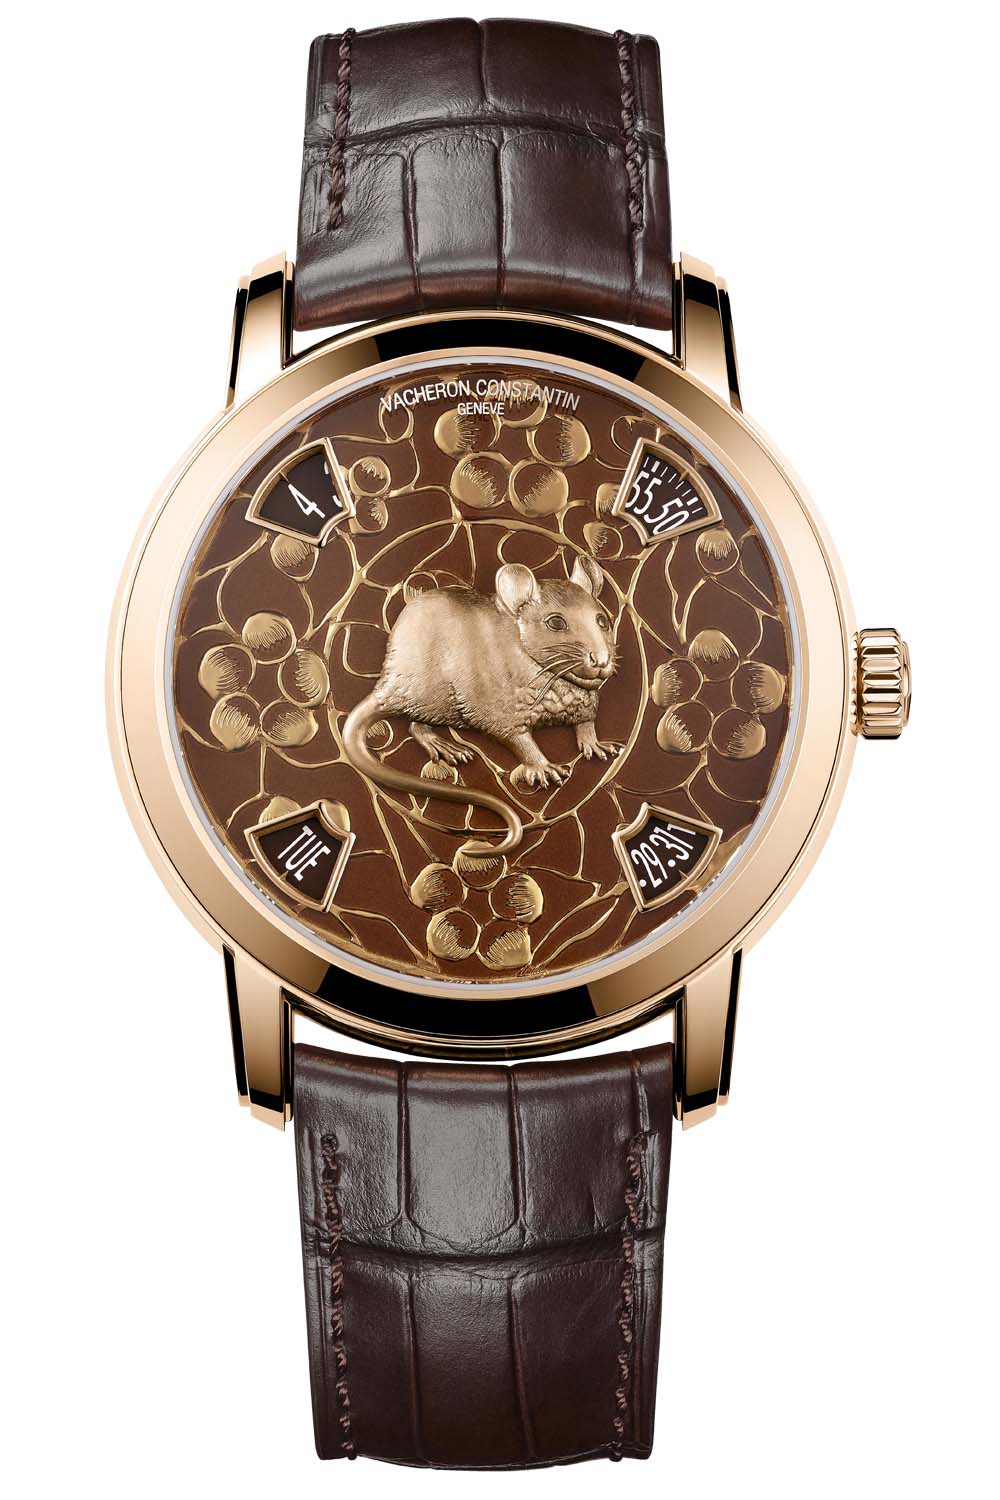 Vacheron Constantin Metiers d’Art The Legend of the Chinese Zodiac – Year of the Rat